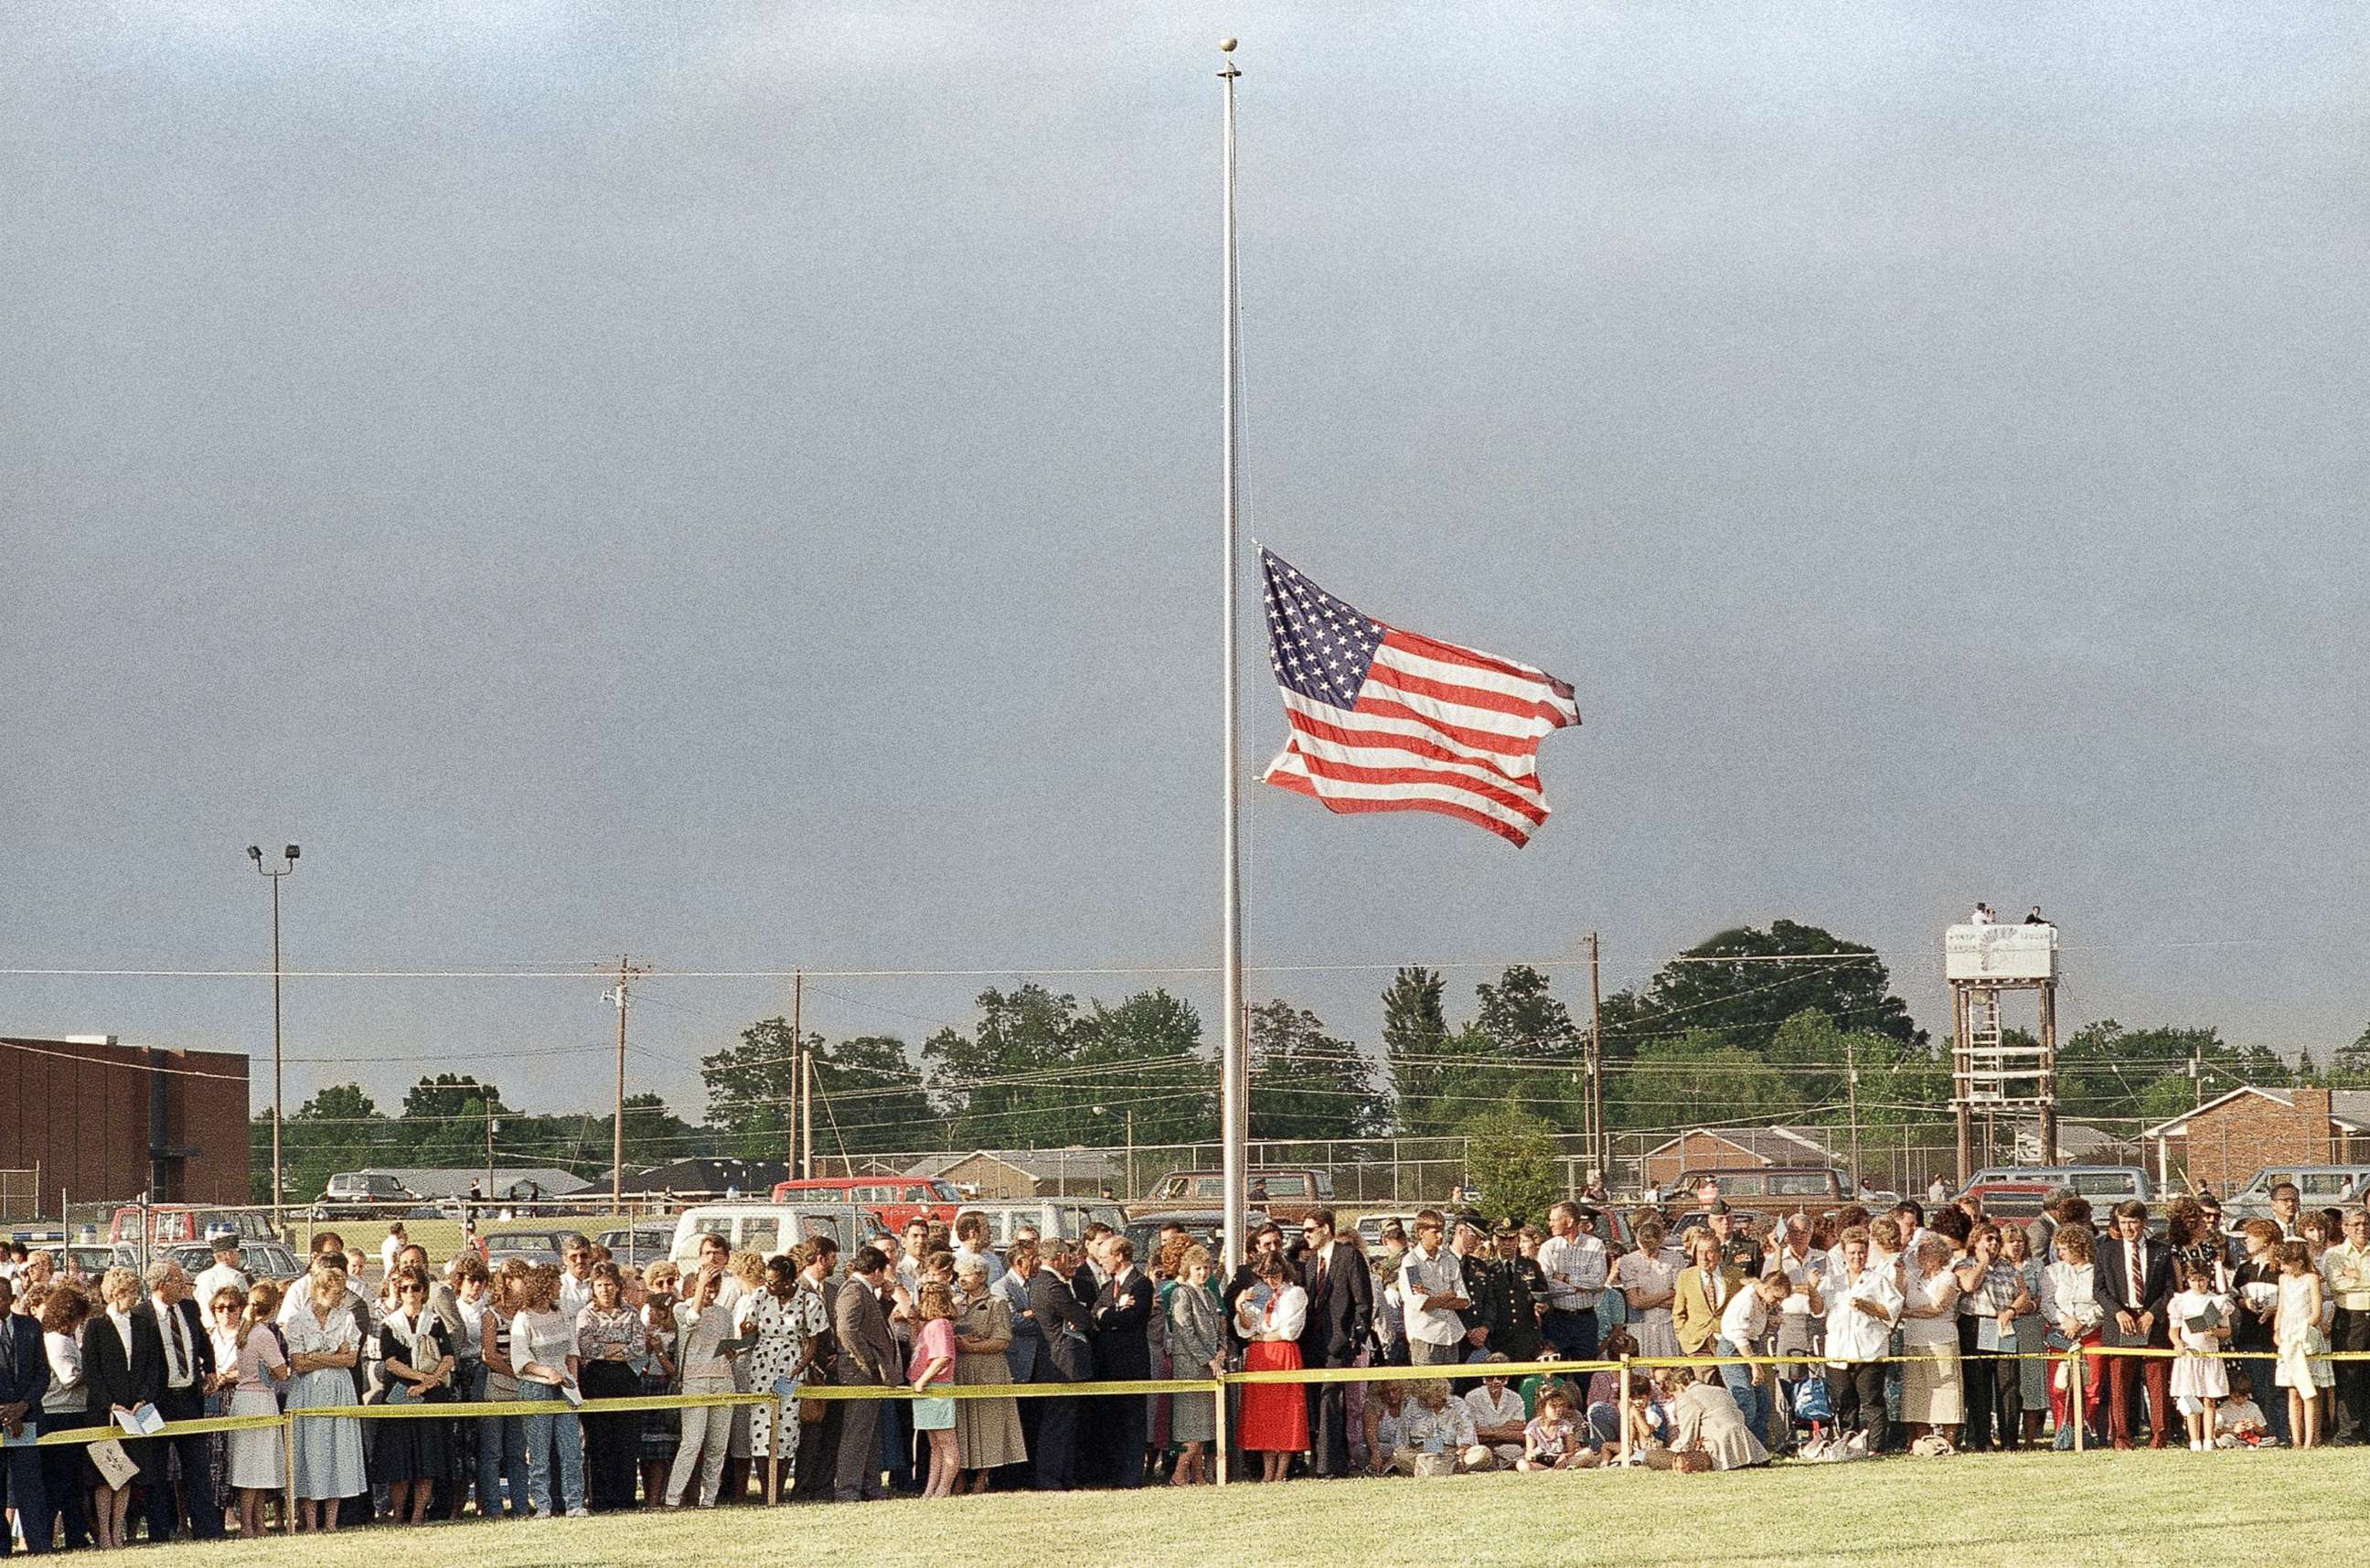 PHOTO: The American flag flies at half must during a memorial service attended by thousands at the North Hardin School football stadium in Radcliff, Ky. on May 19, 1988, in honor of the 27 people killed in a bus accident near Carrollton.